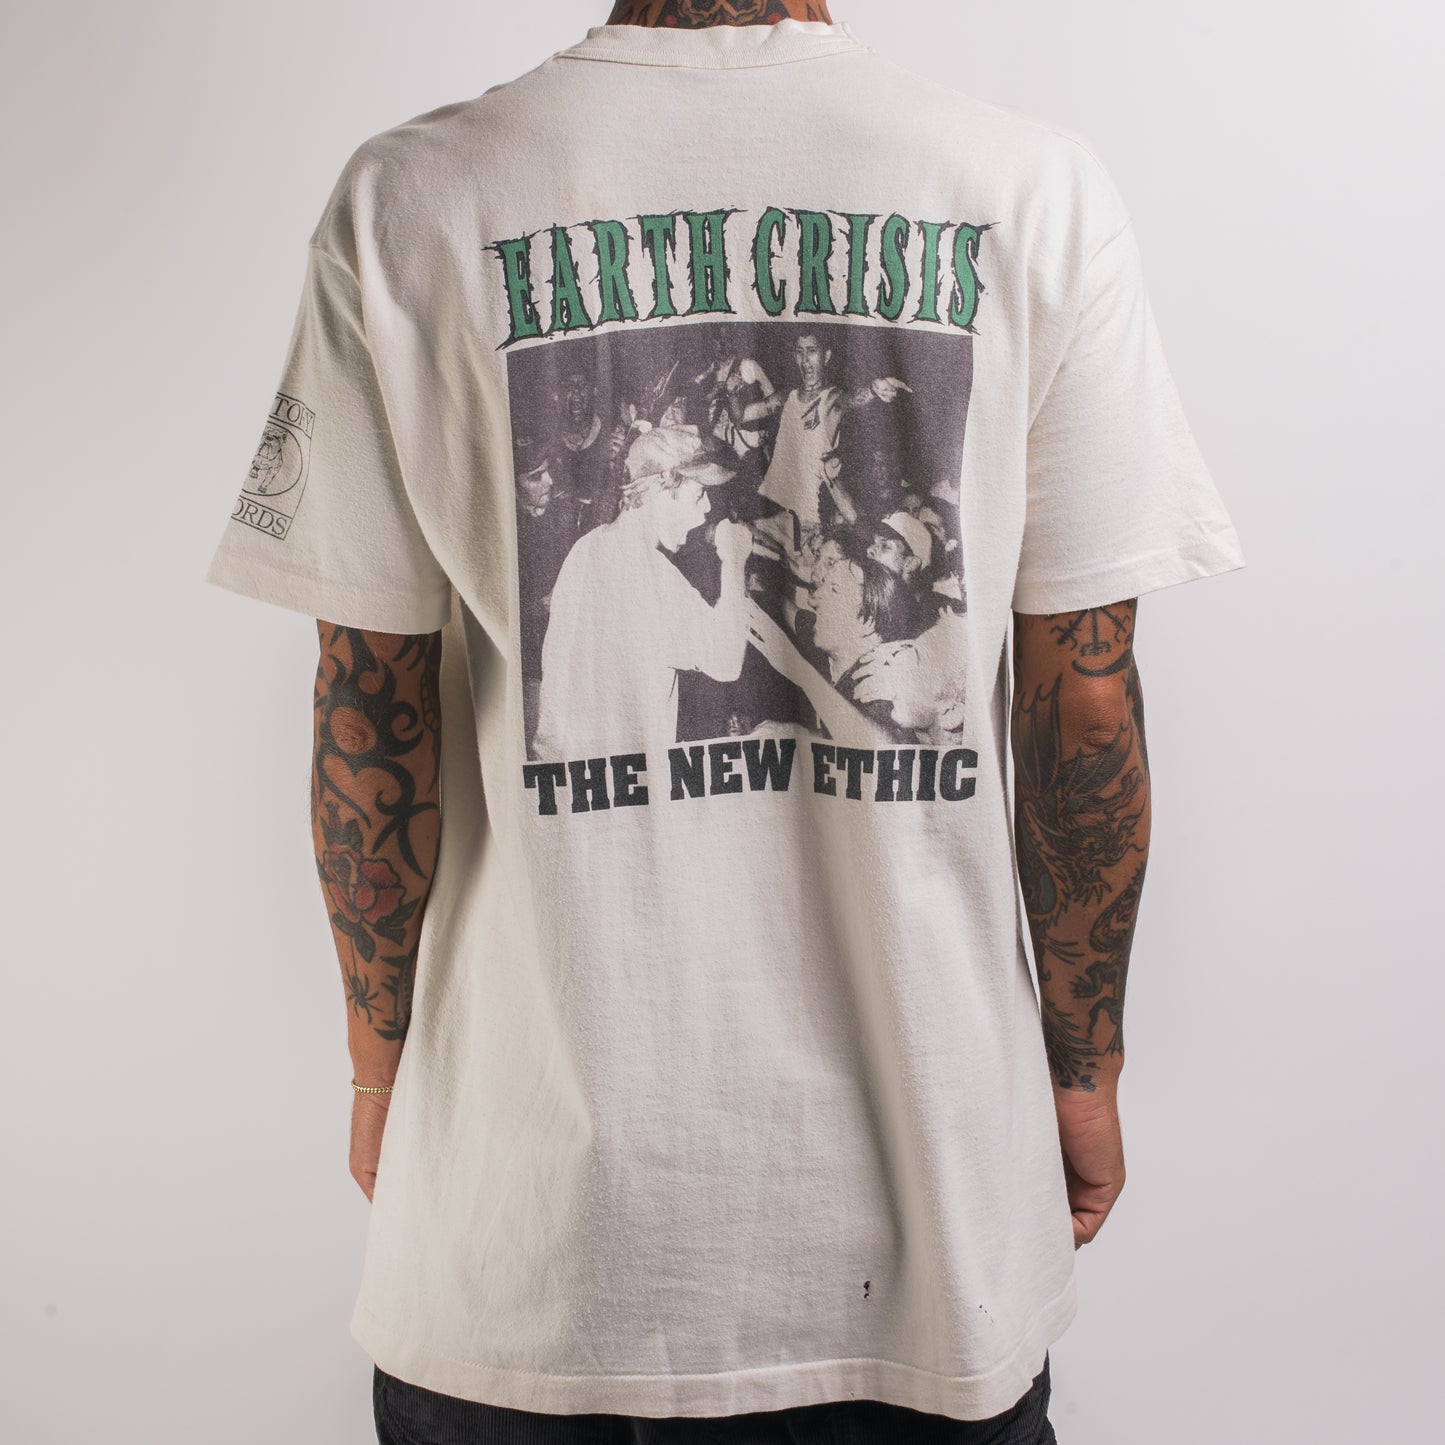 Vintage 90’s Earth Crisis The New Ethic T-Shirt